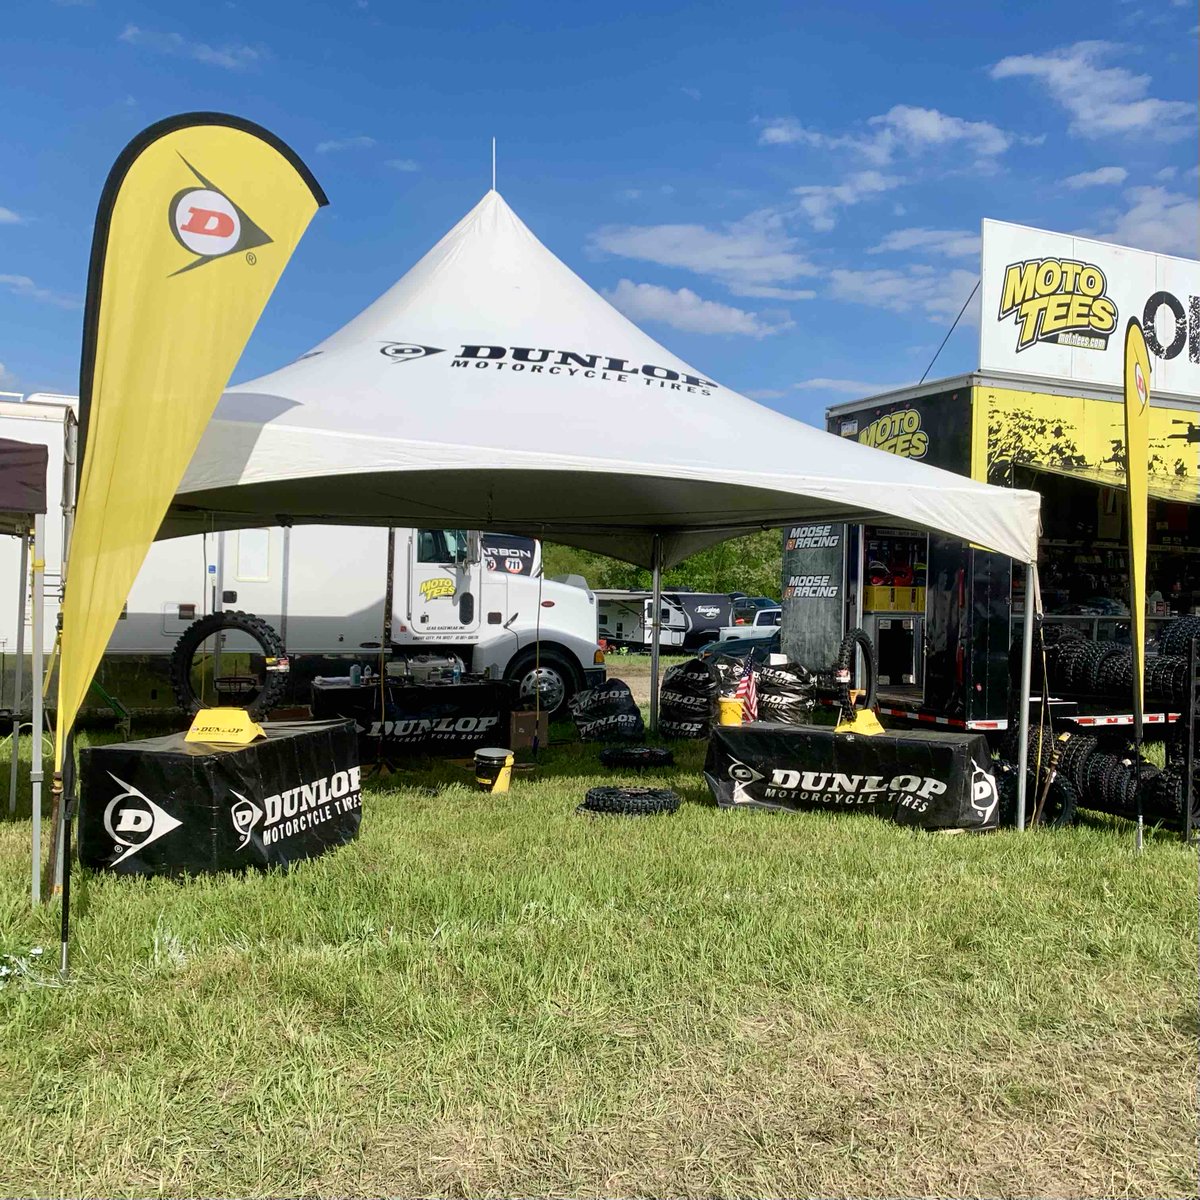 Here for you at all @gncc_racing events! Stocked up with Geomax tires for you! 🫵 Don’t forget to ask about our new loyalty program and pre-ordering option! #RideDunlop #RaceDunlop #GNCC #GNCCRacing #AT82 #TracksideSupport #Dunlop